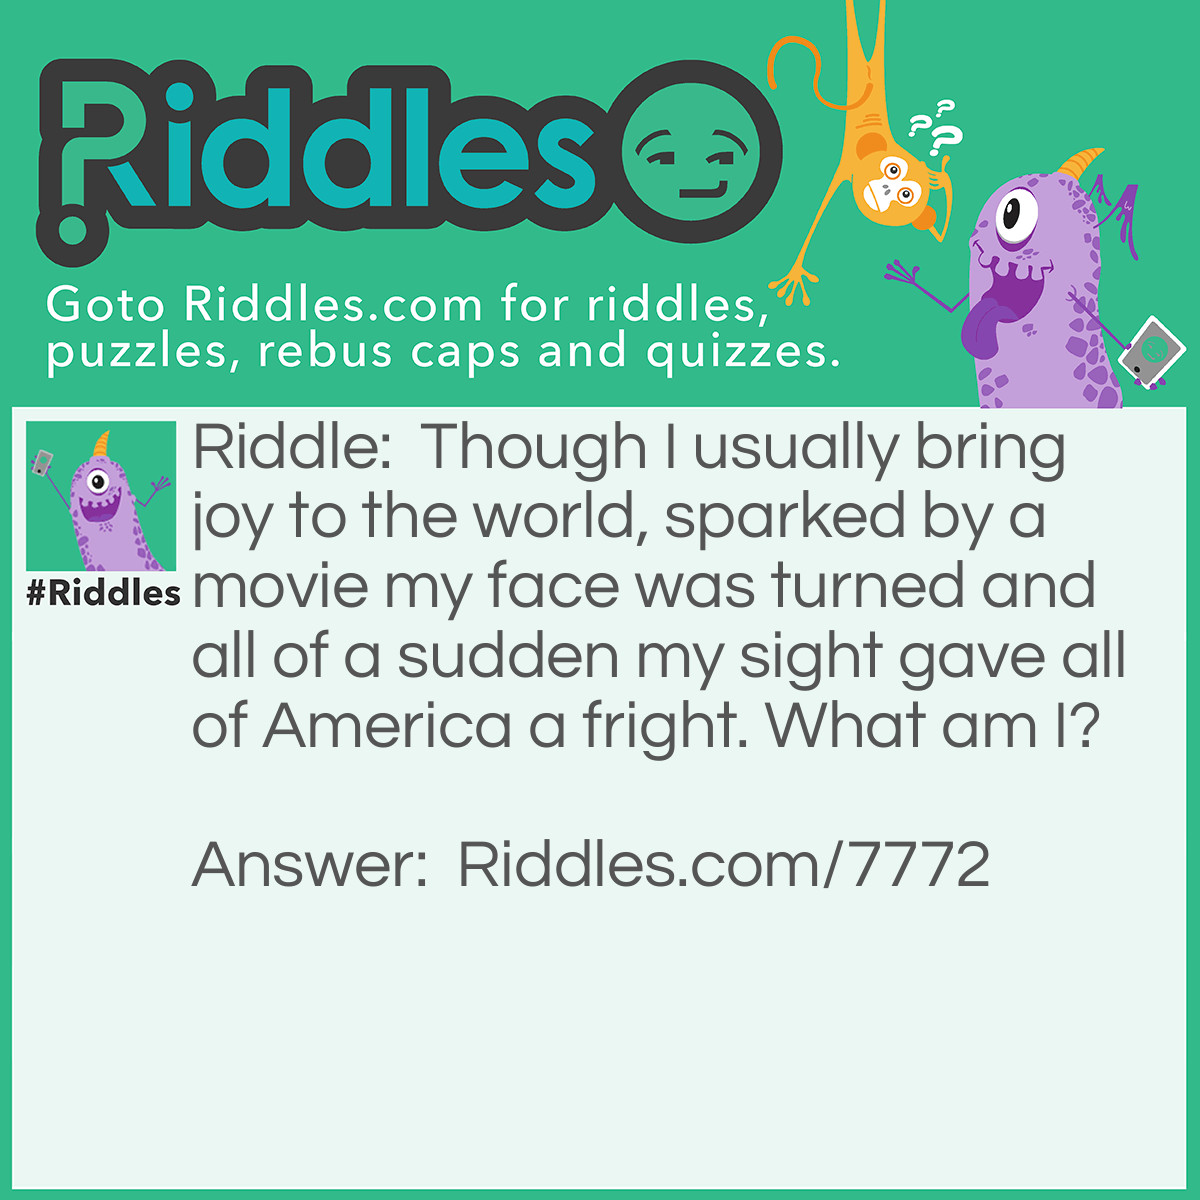 Riddle: Though I usually bring joy to the world, sparked by a movie my face was turned and all of a sudden my sight gave all of America a fright. What am I? Answer: The clown epidemic of 2016.